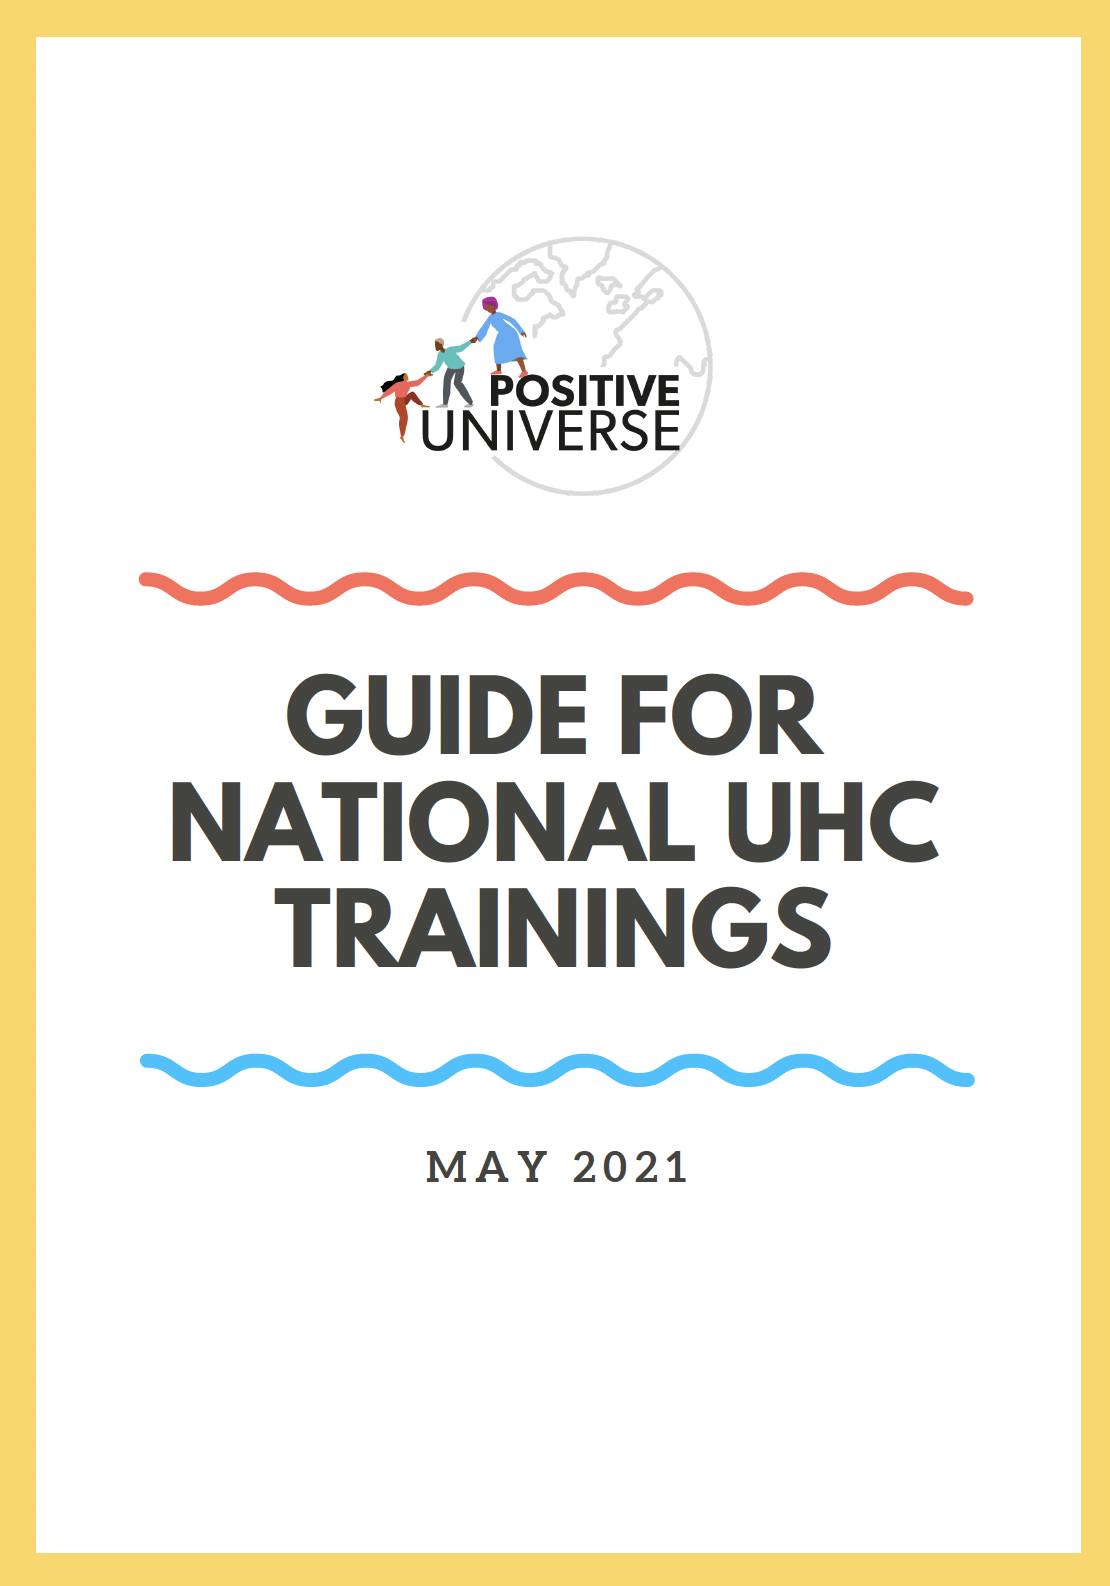 Guide for National UHC Trainings